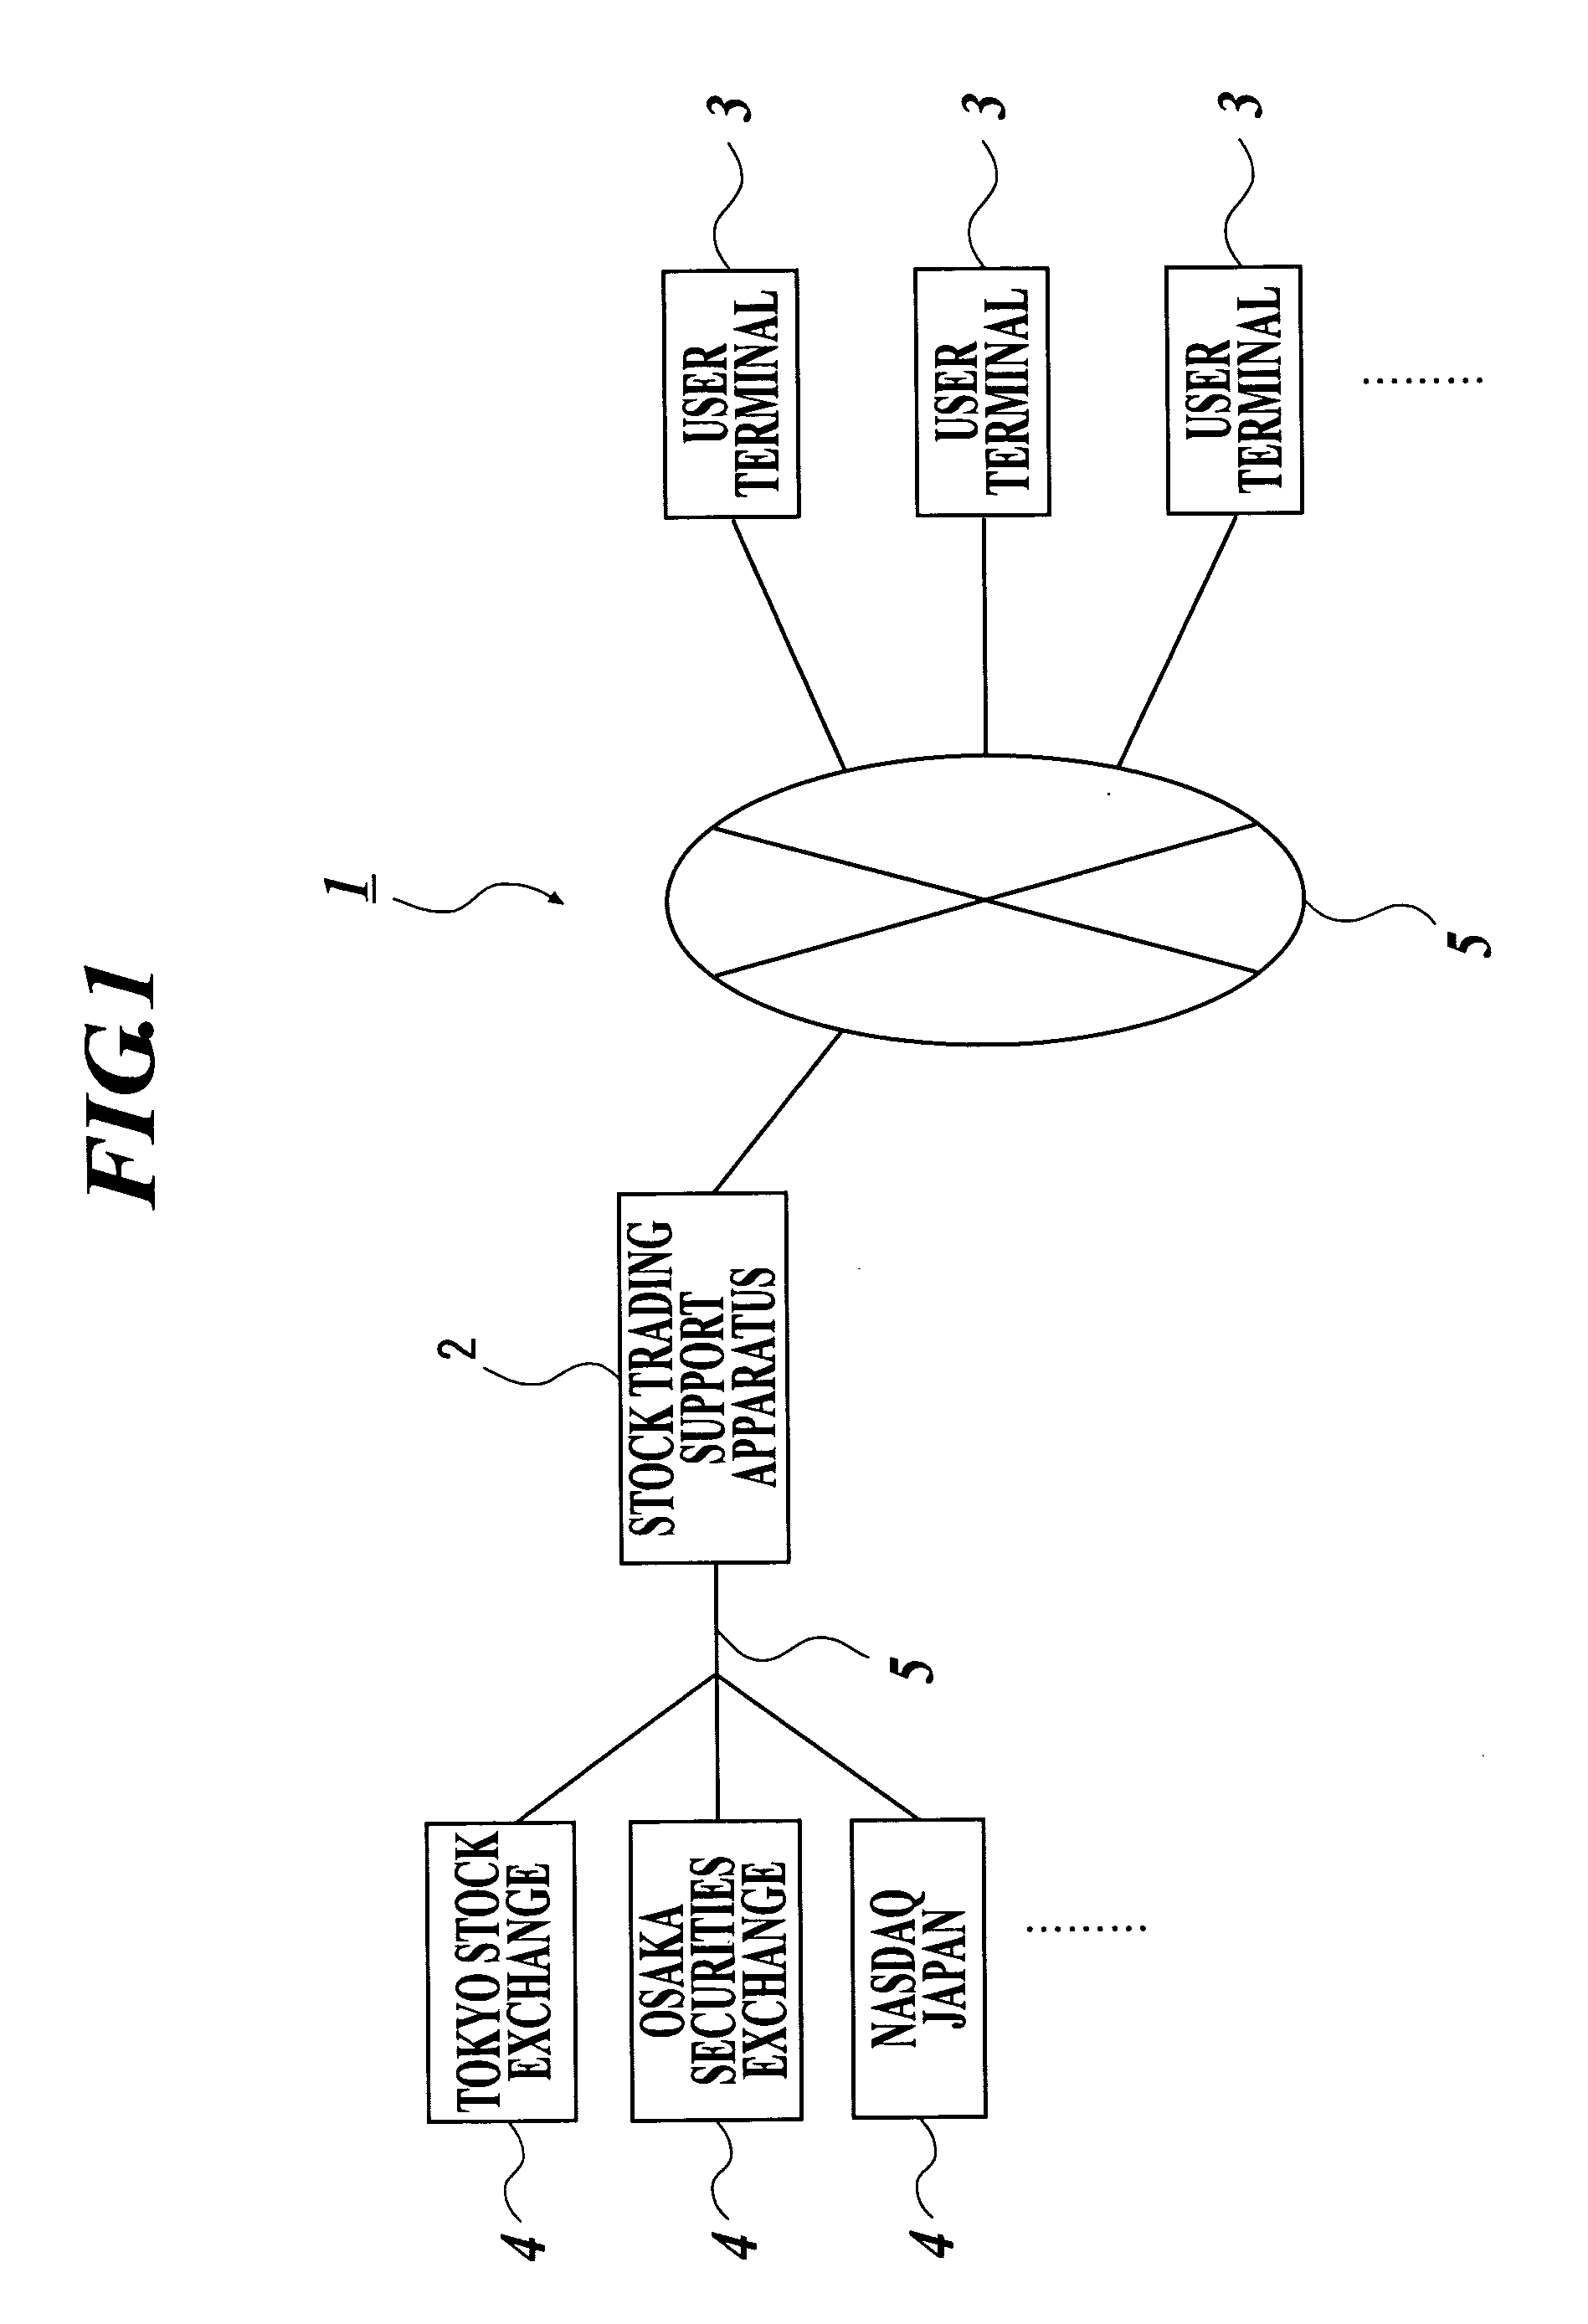 Stock-jobbing support device and stock-jobbing support system